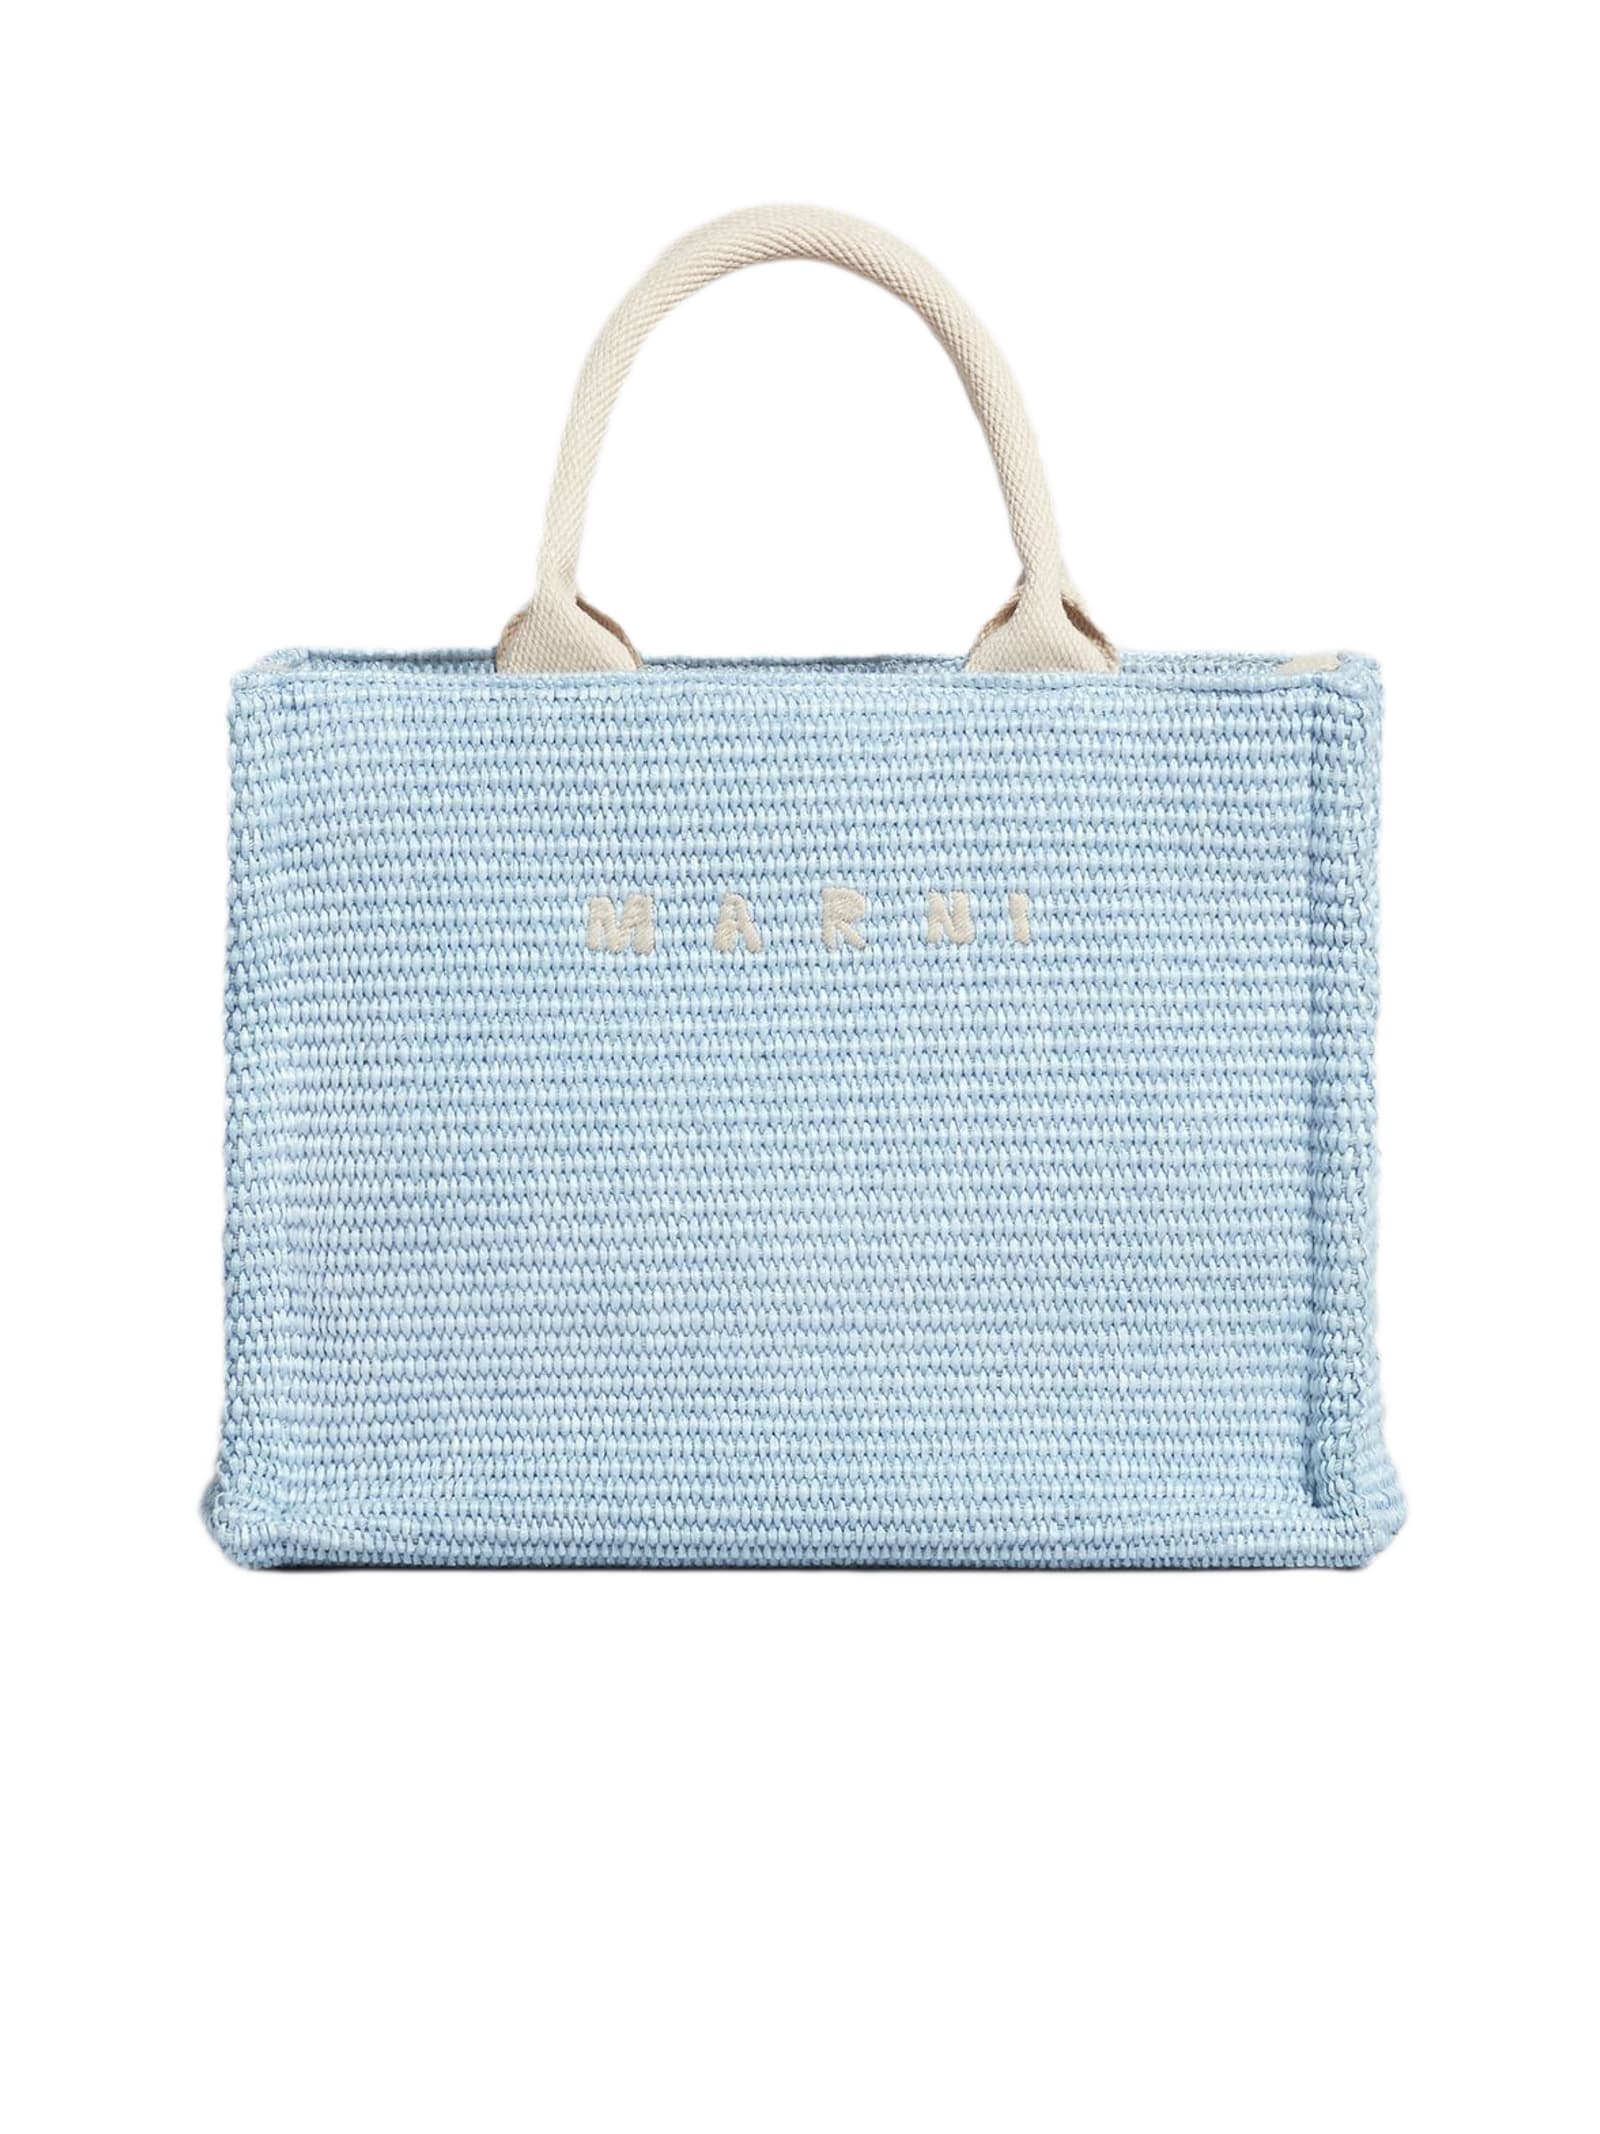 East West Large Logo Tote Bag in Blue - Marni